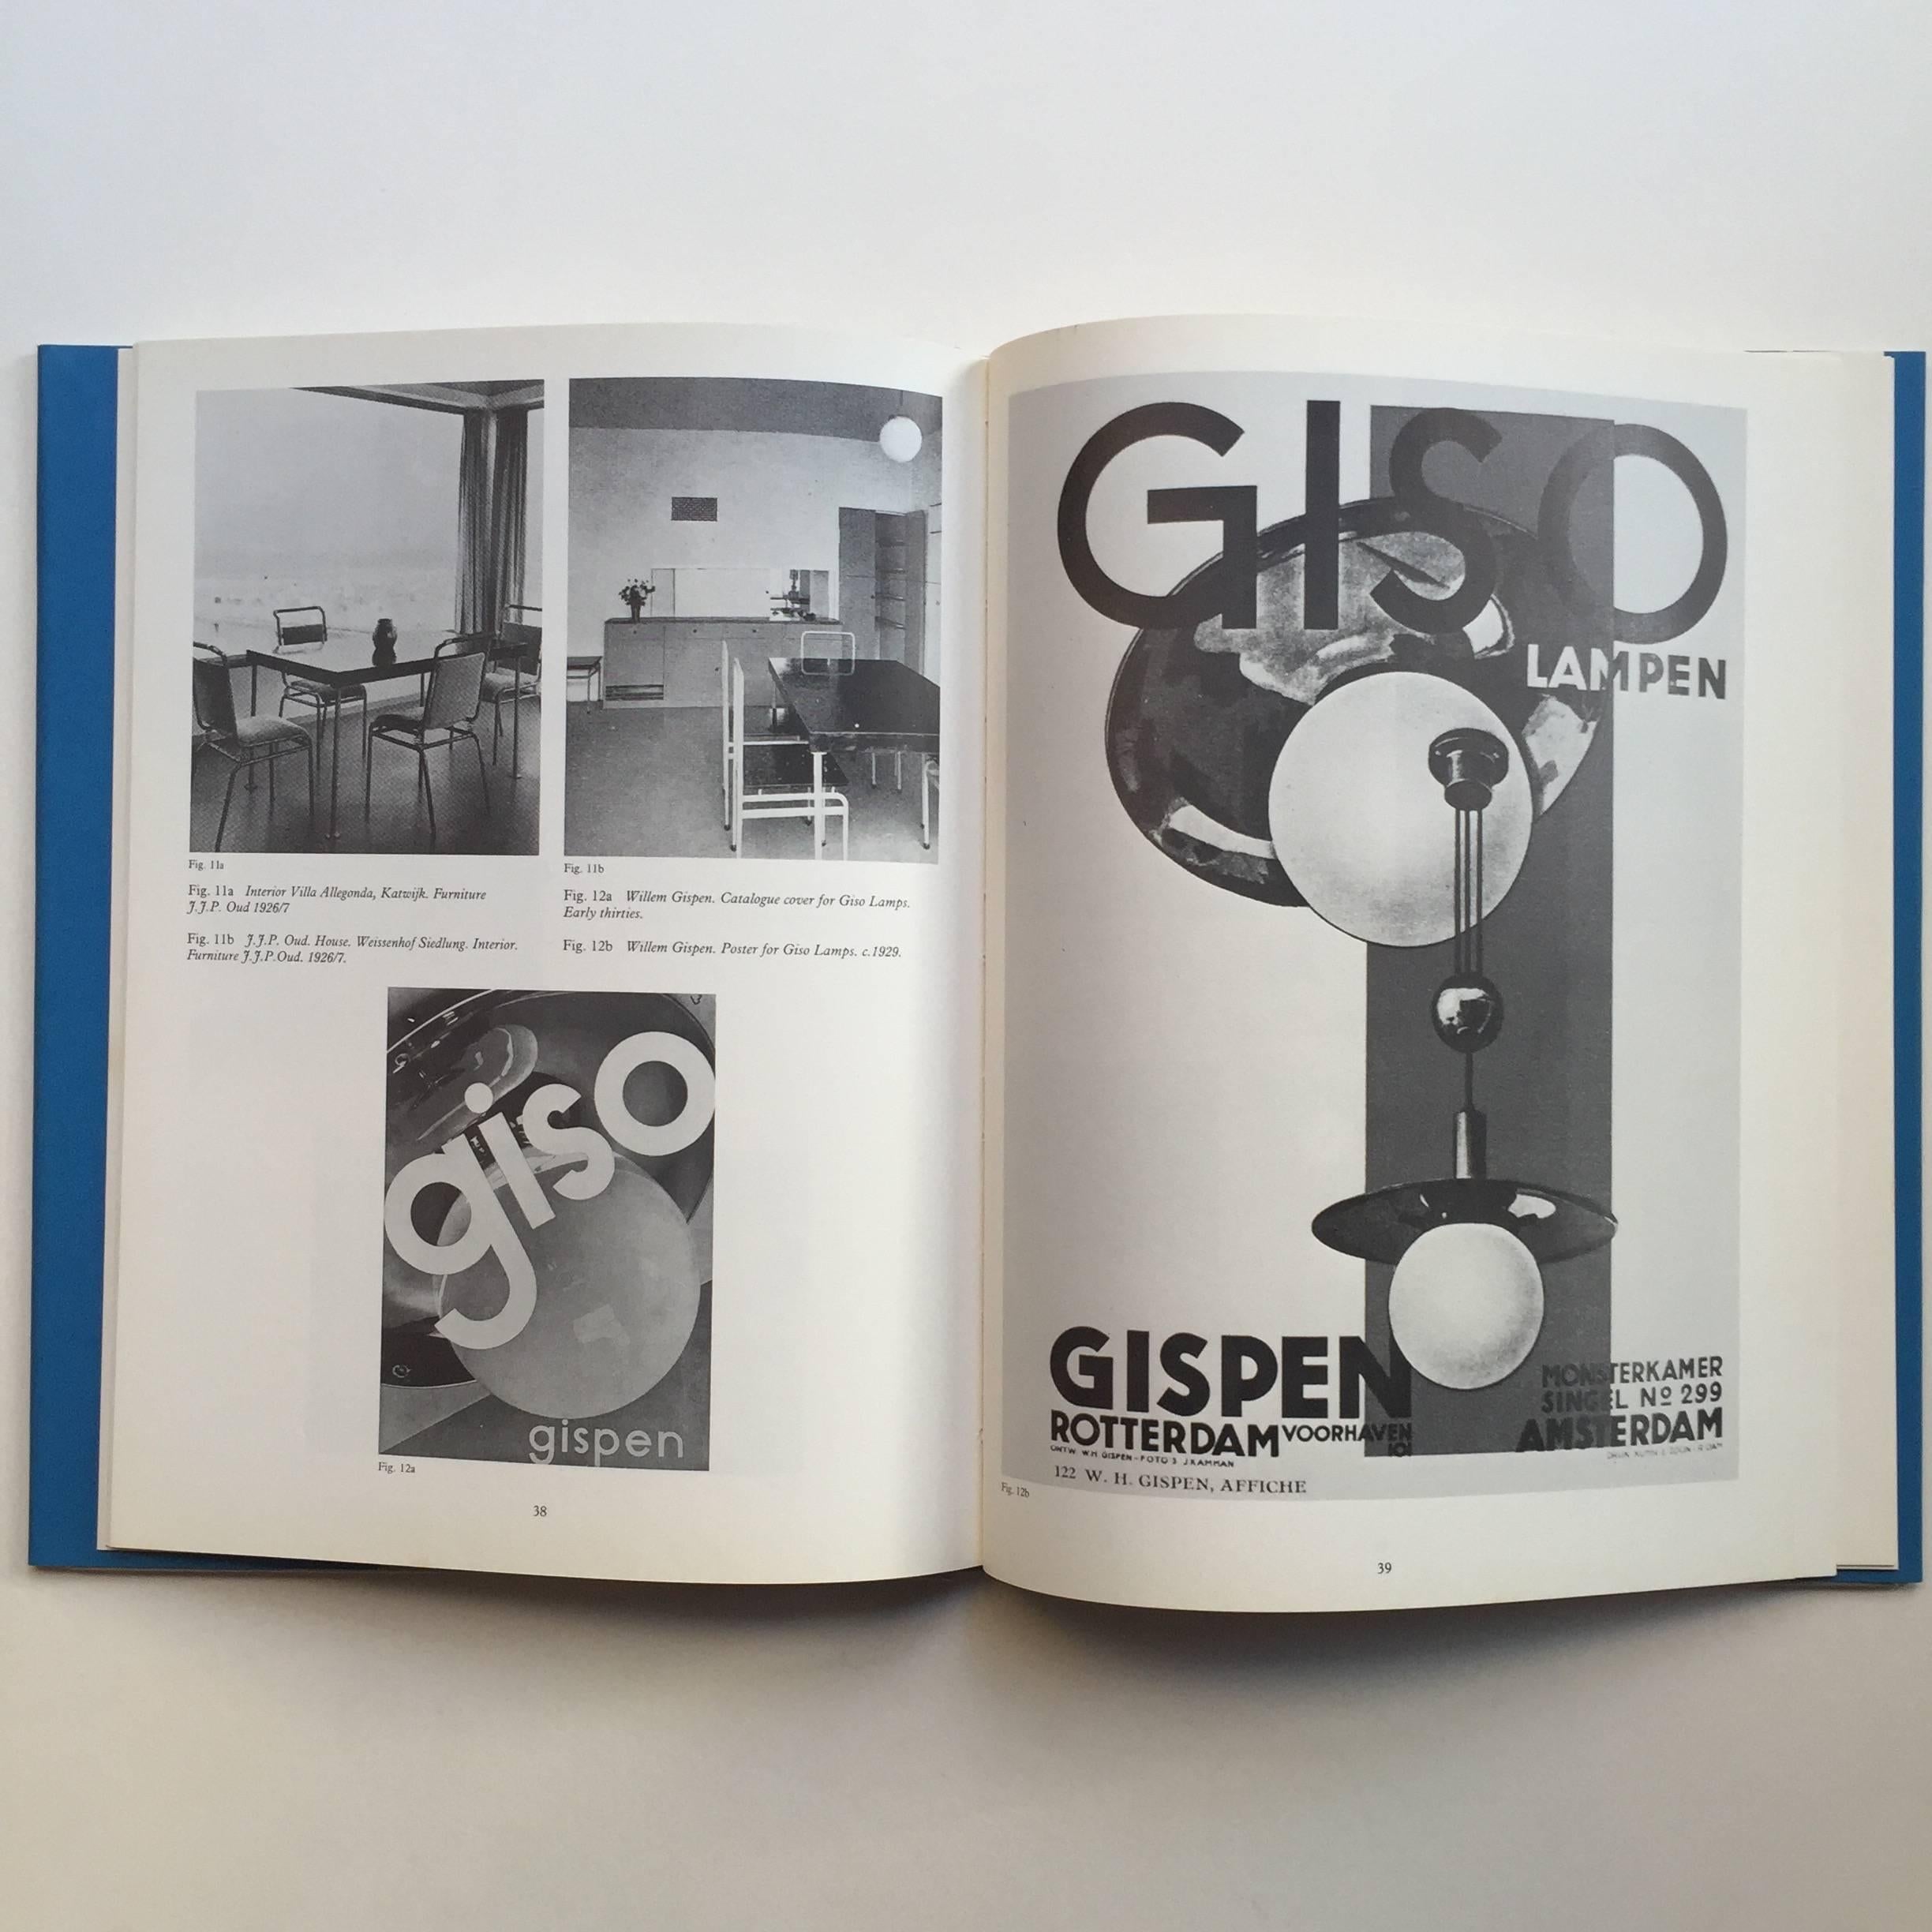 First edition, published by The Art Book Company, 1979

This detailed survey on tubular steel furniture documents the developments in style, production and reception of the style; from its origins with Thonet and Marcel Breuer in Germany, to